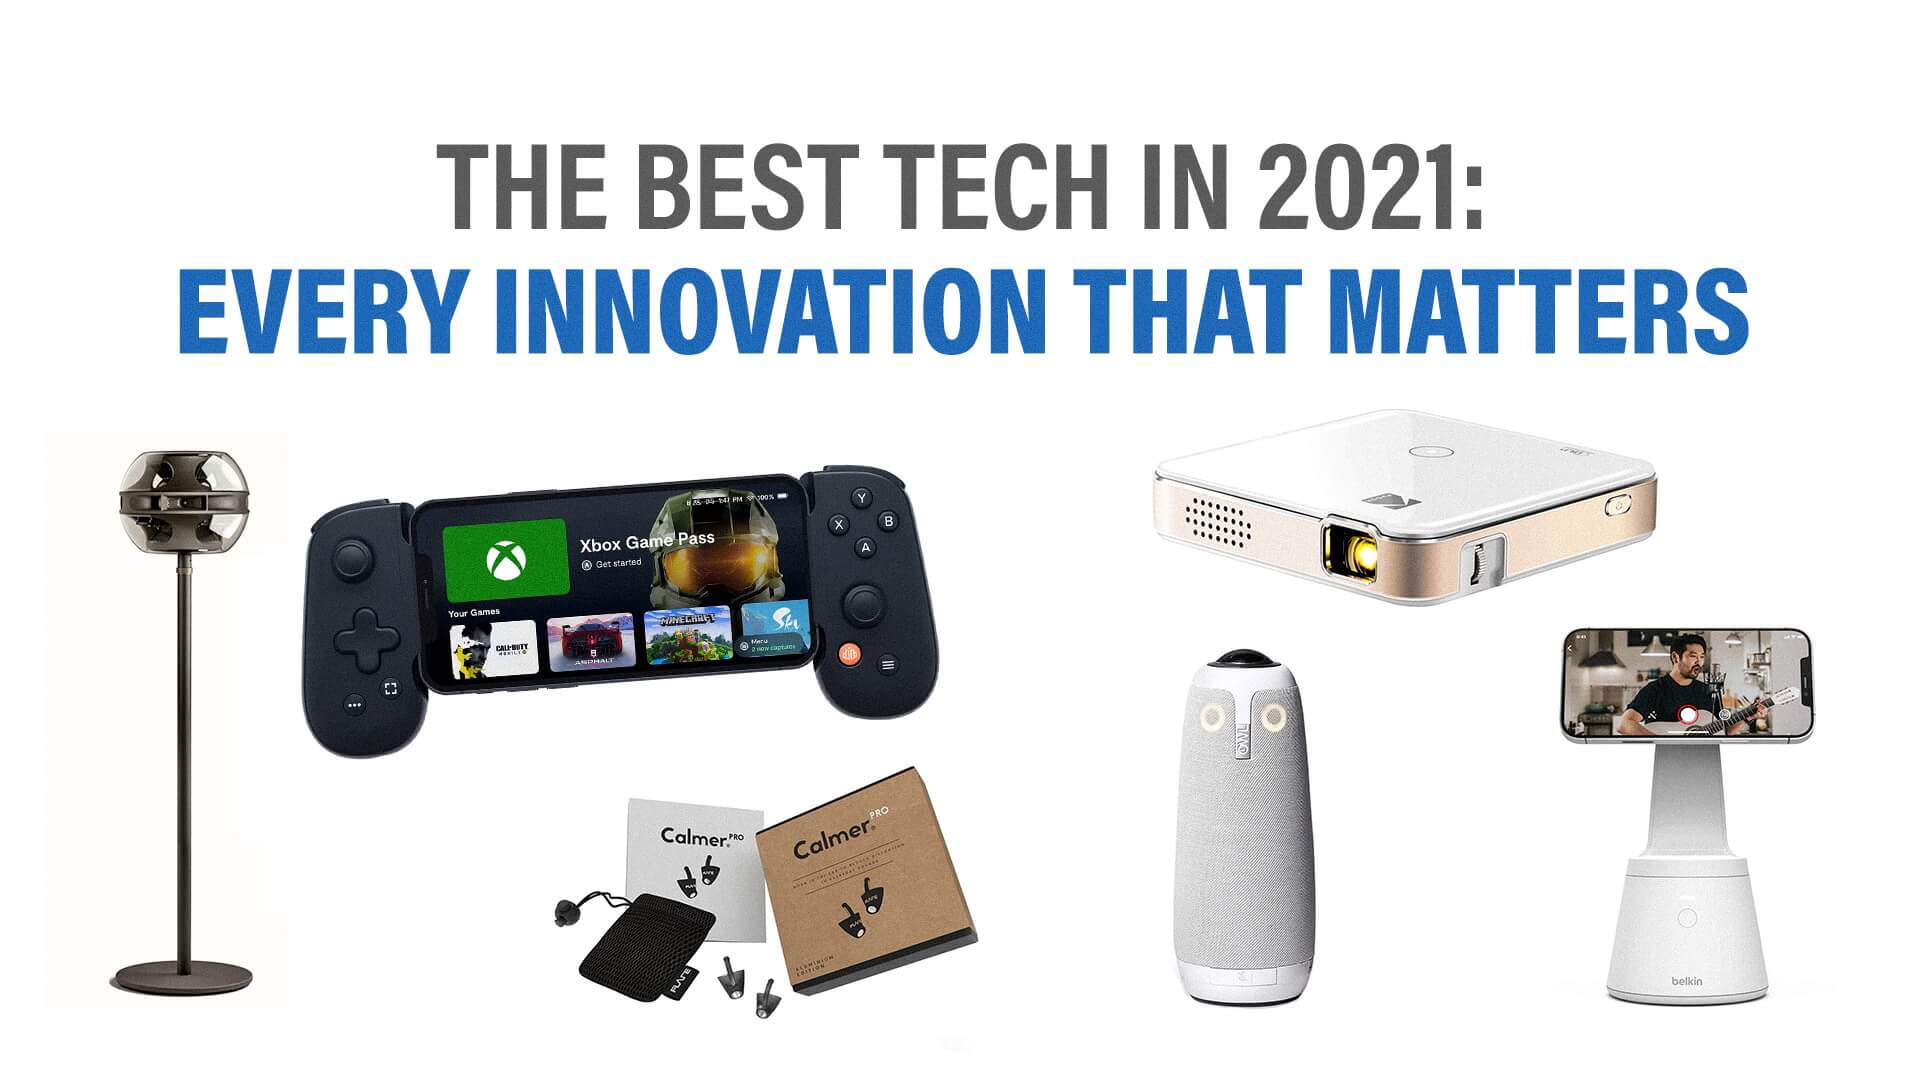 Every Innovation That Matters